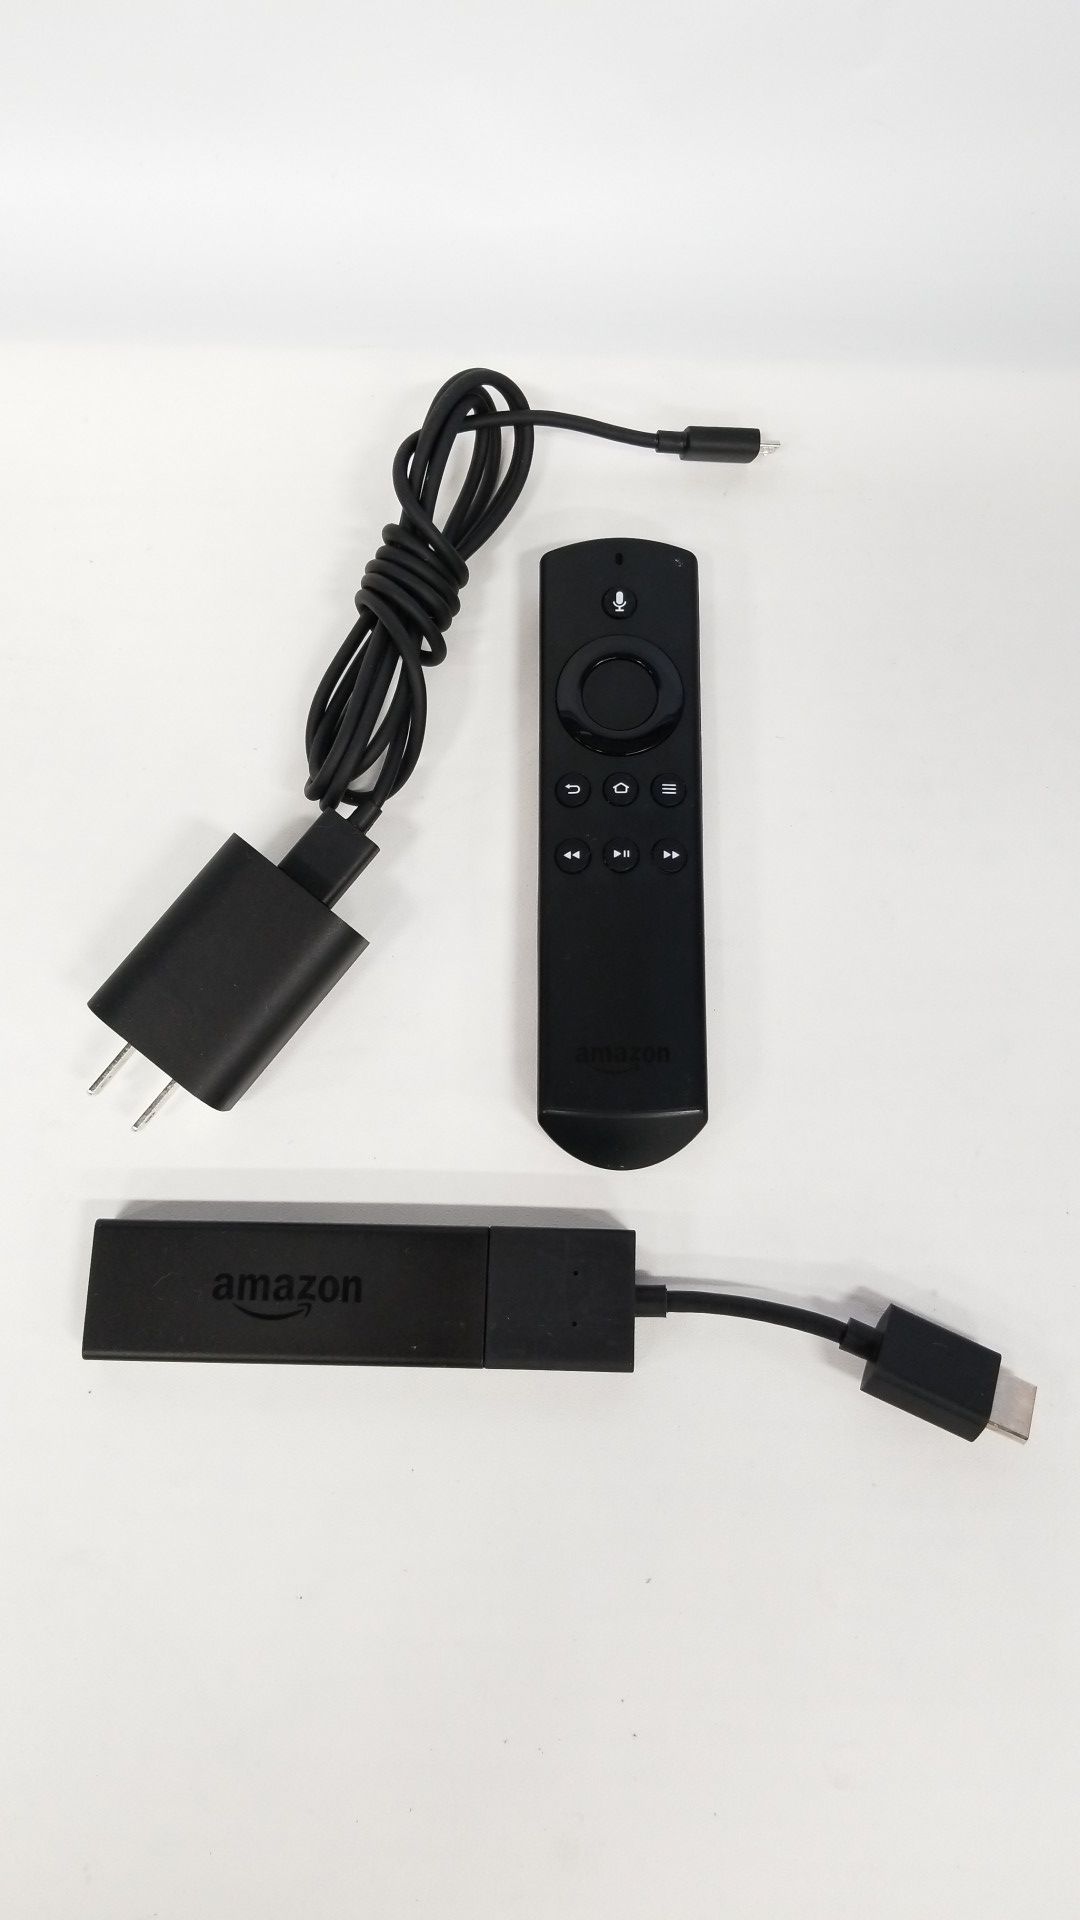 Amazon Fire TV Stick with Remote and Cords (773803-13)